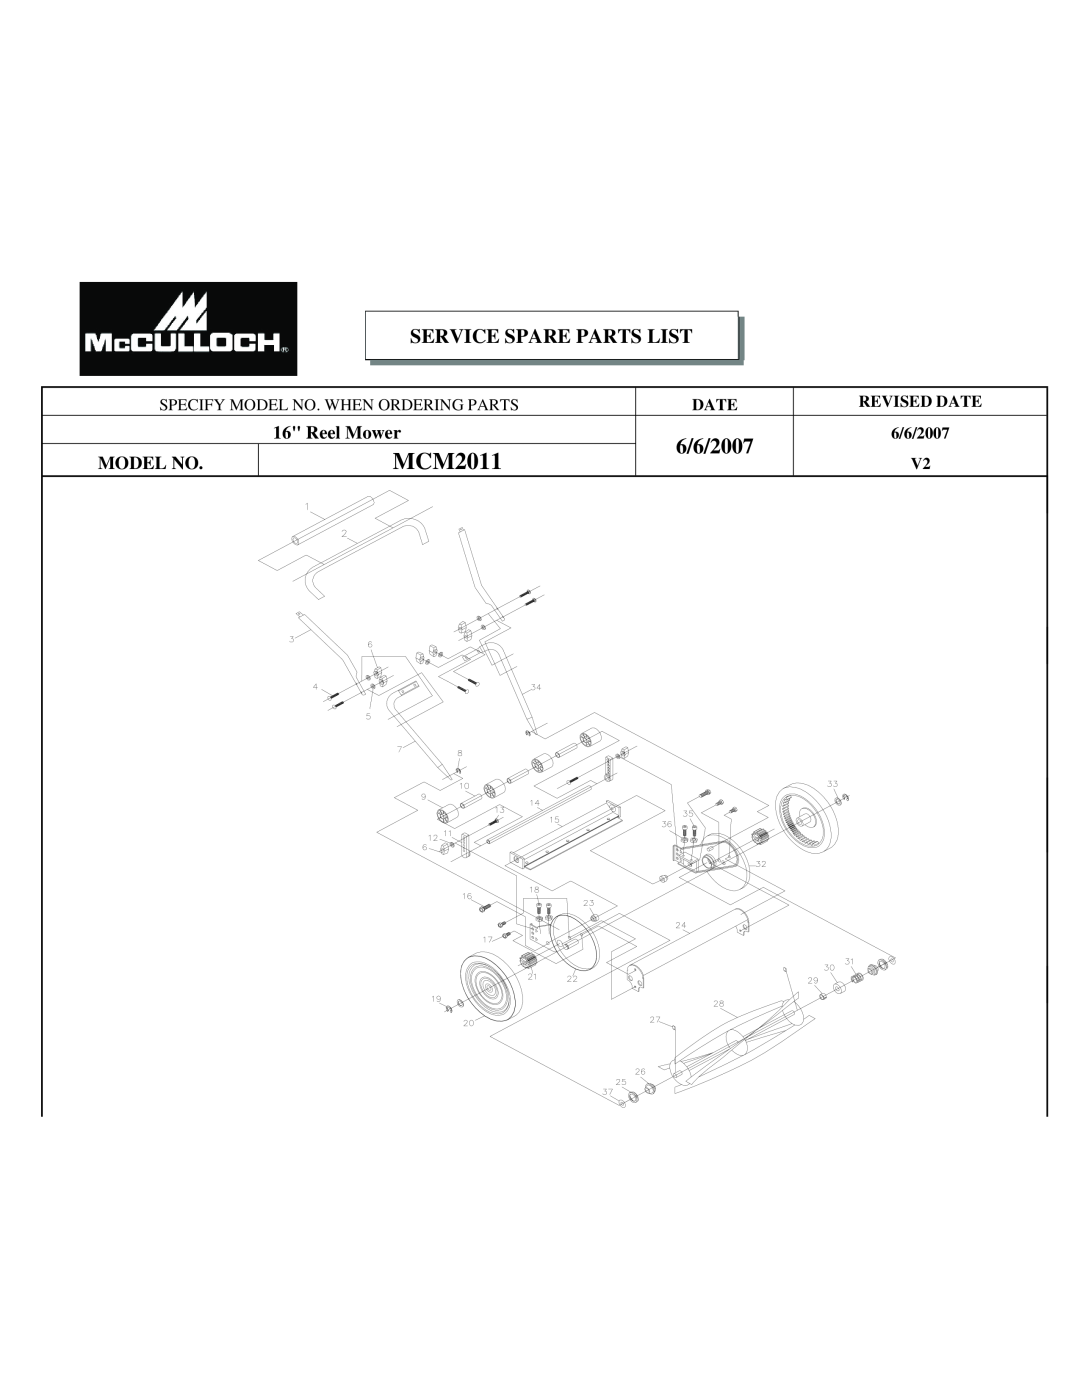 McCulloch MCM2013 user manual MCM2011, 6/6/2007, Service Spare Parts List, Specify Model No. When Ordering Parts, Date 